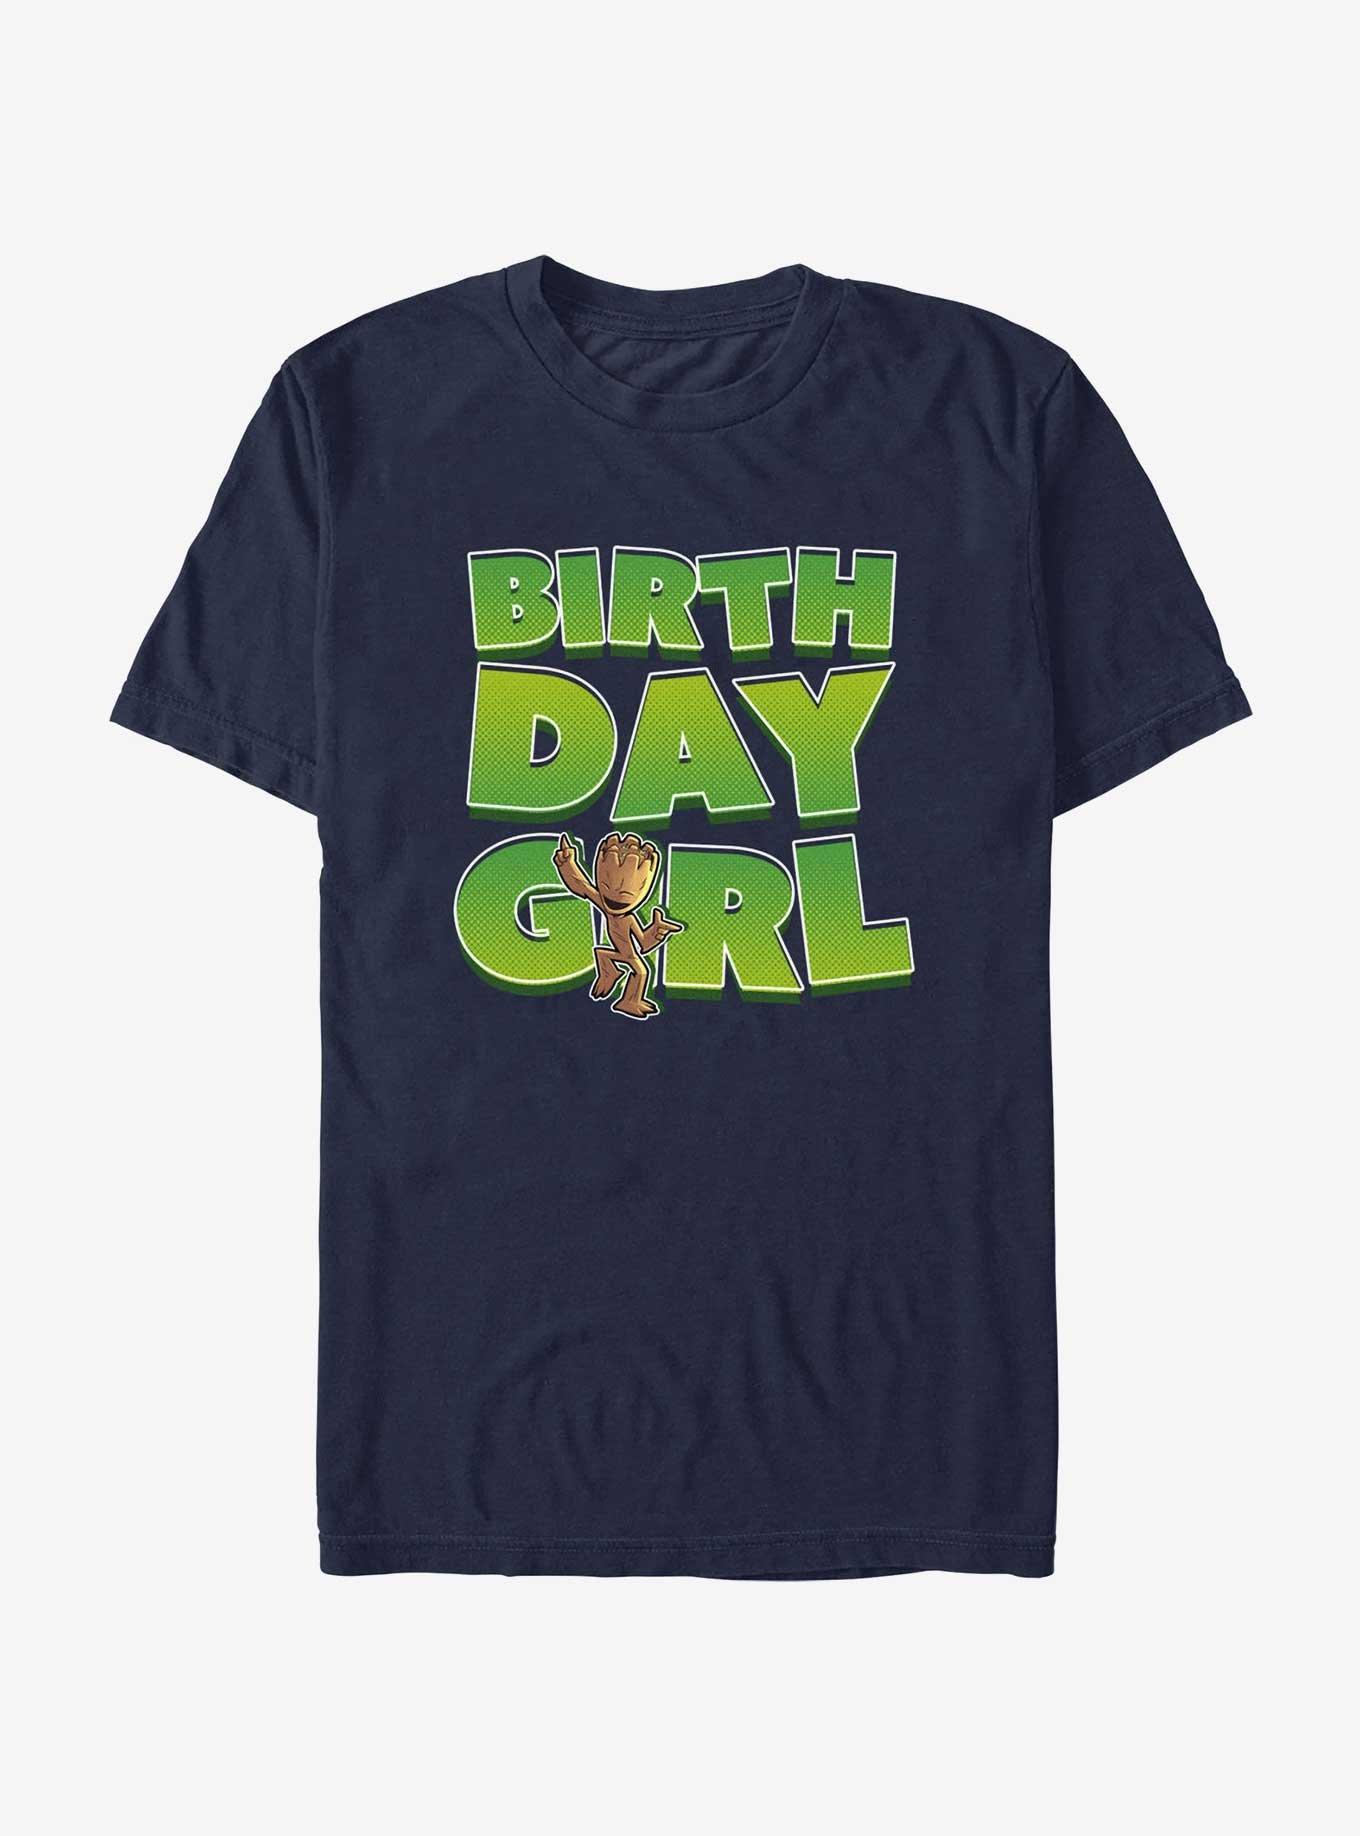 Marvel Guardians of the Galaxy Groot Birthday T-Shirt, NAVY, hi-res